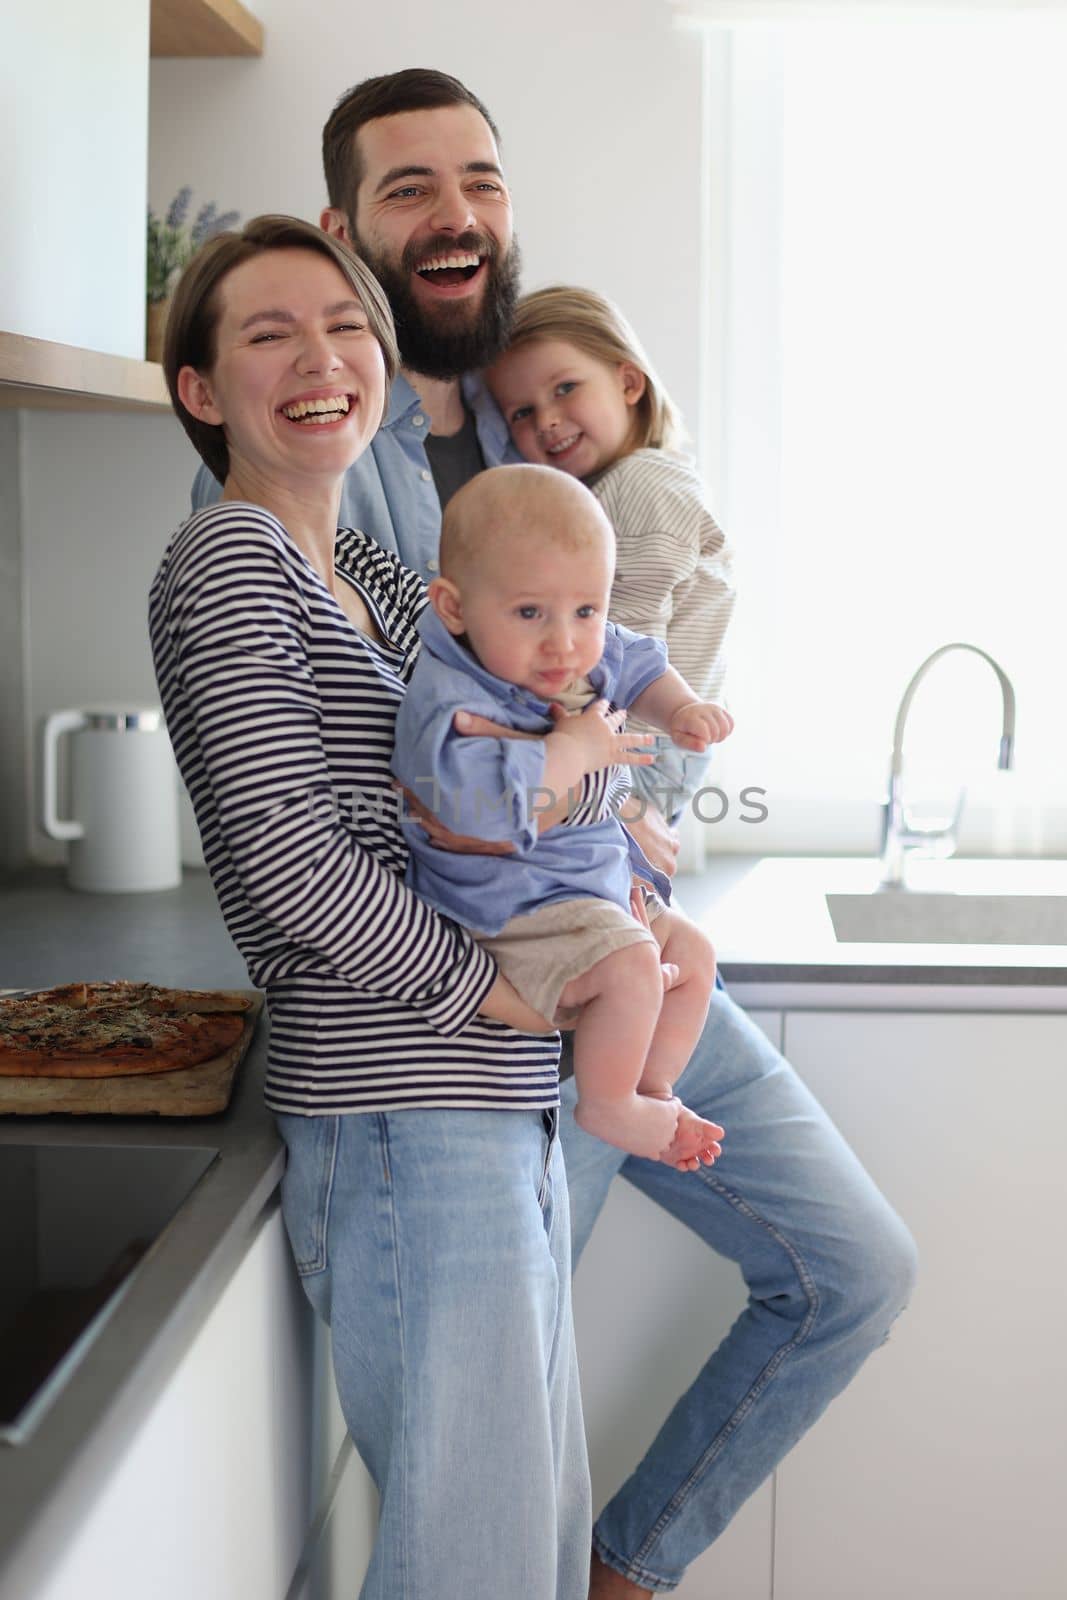 Family of 4 posing in the kitchen smiling and happy